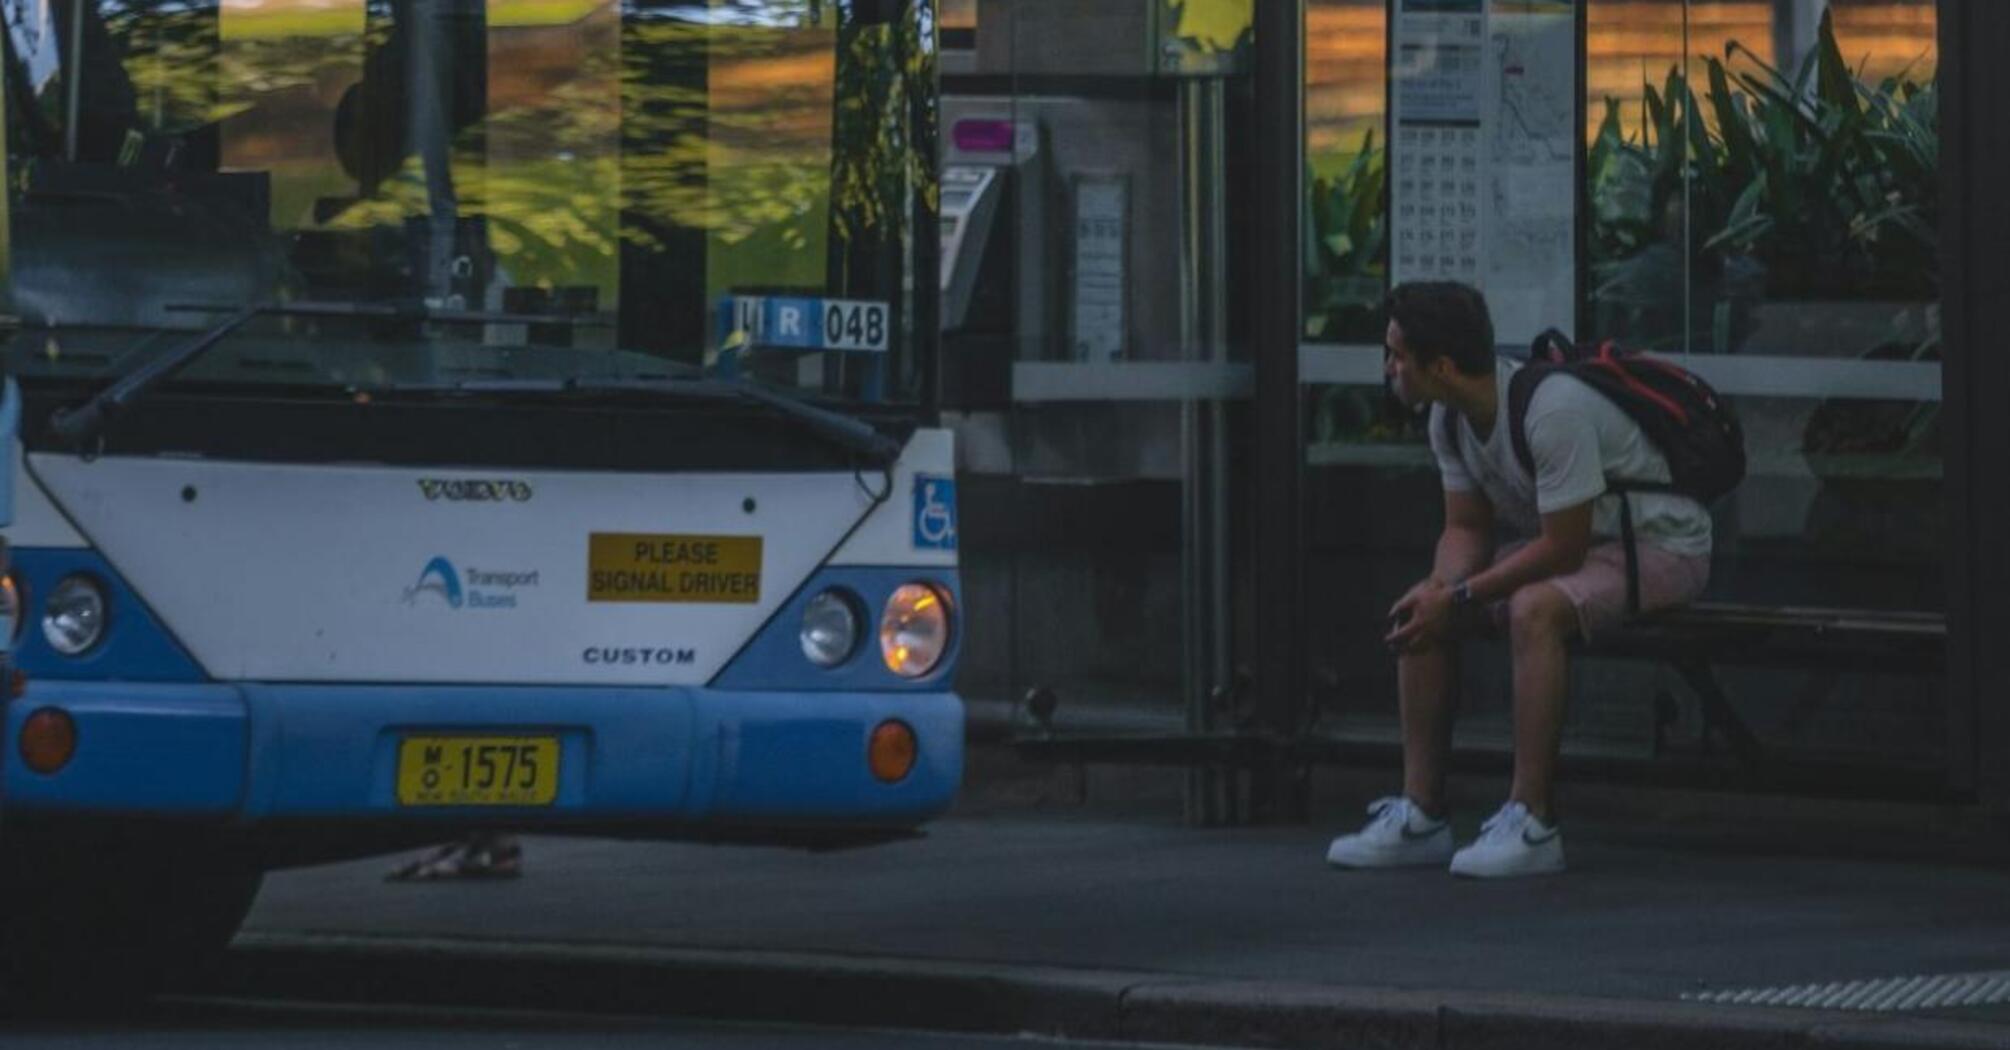 A bus with a passenger waiting at the bus stop